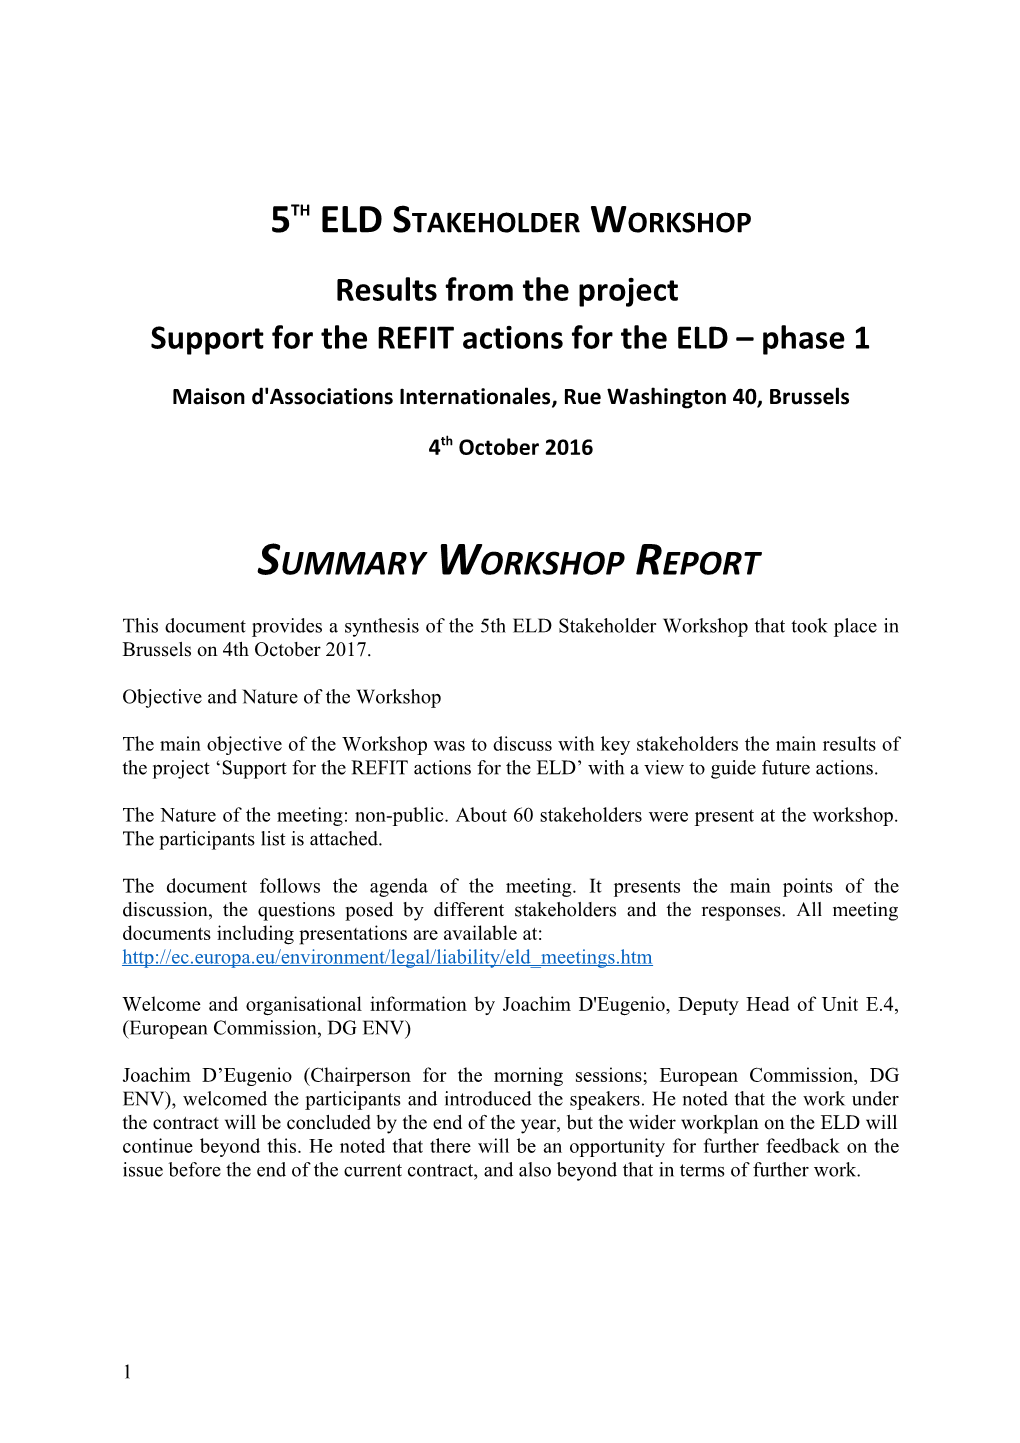 Support for the REFIT Actions for the ELD Phase 1